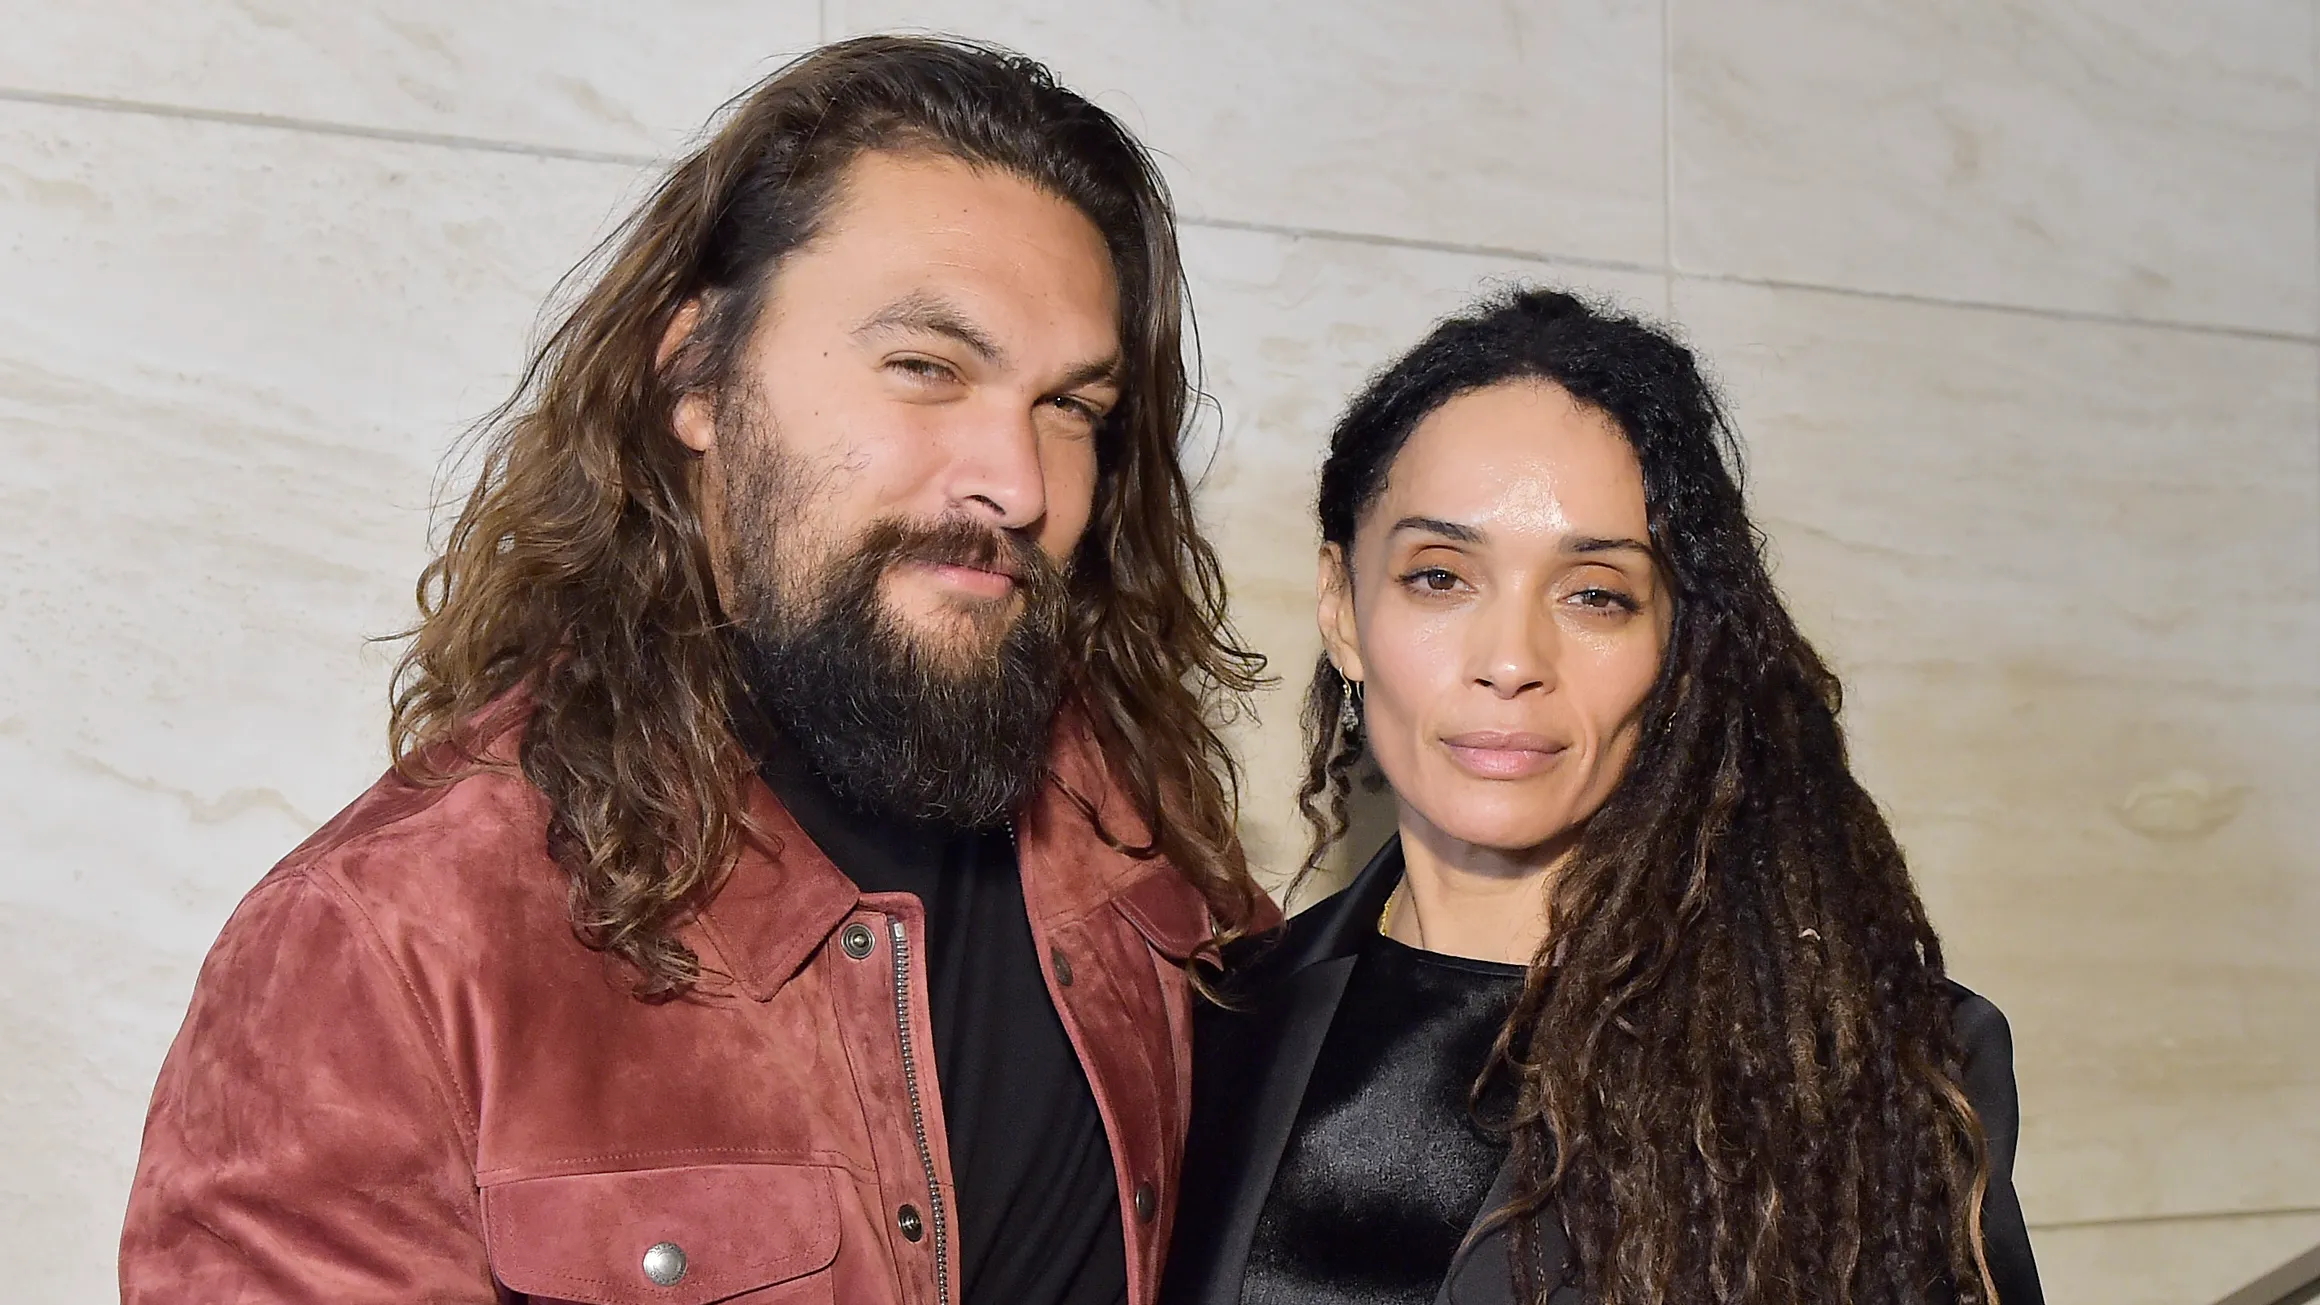 Jason momoa with his wife